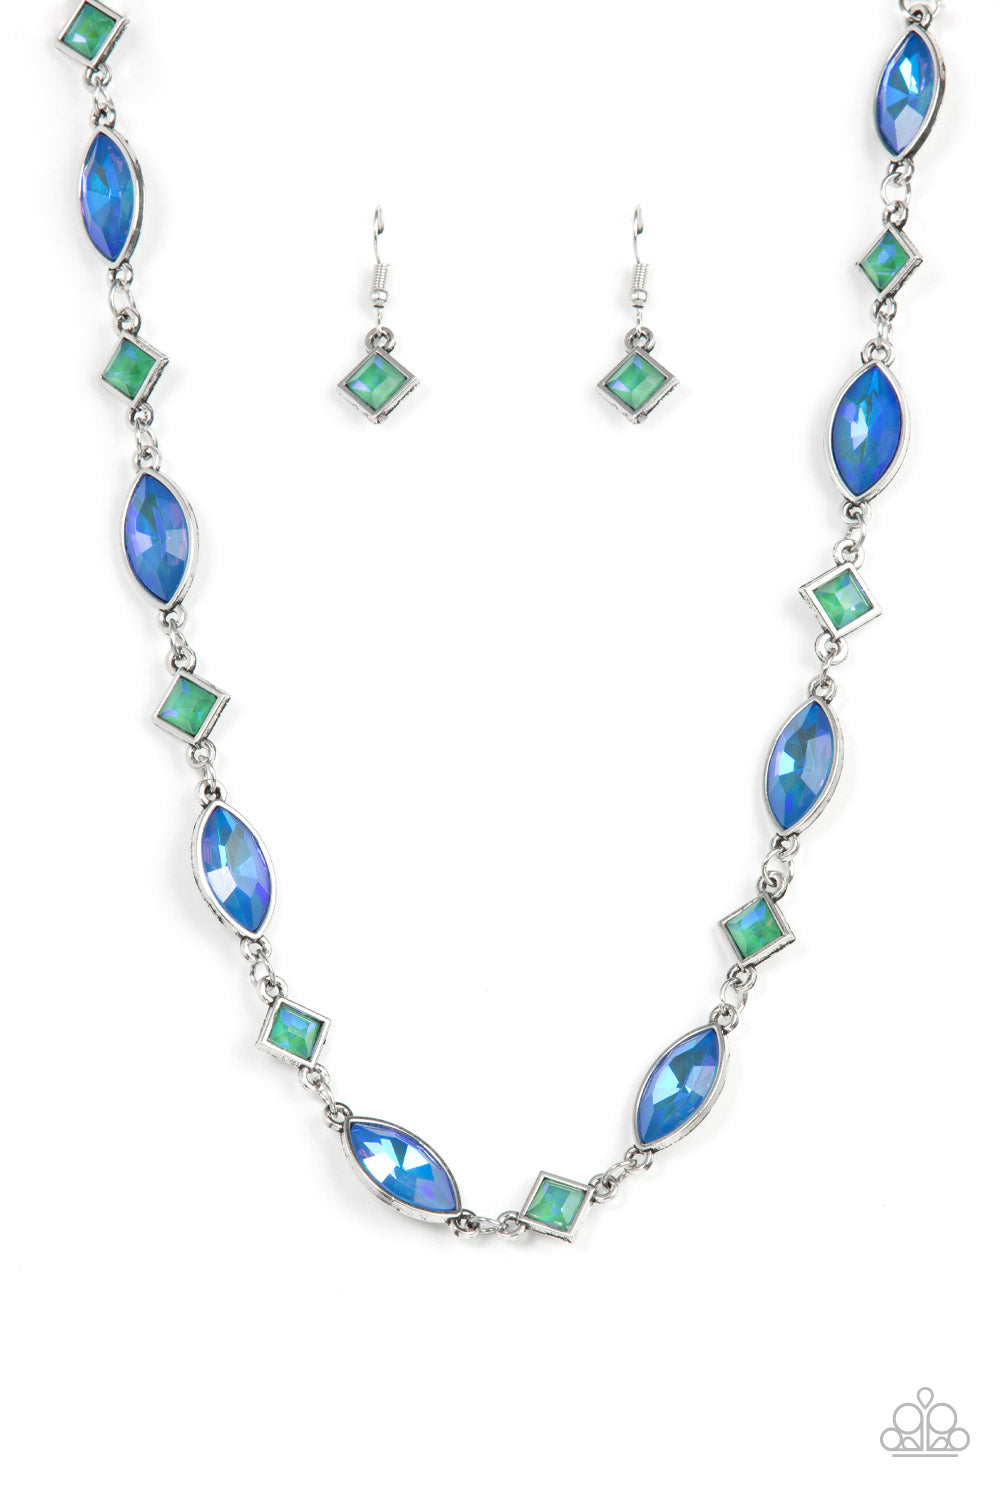 Prismatic Reinforcements - Blue and Green Rhinestone Necklace - Paparazzi Accessories